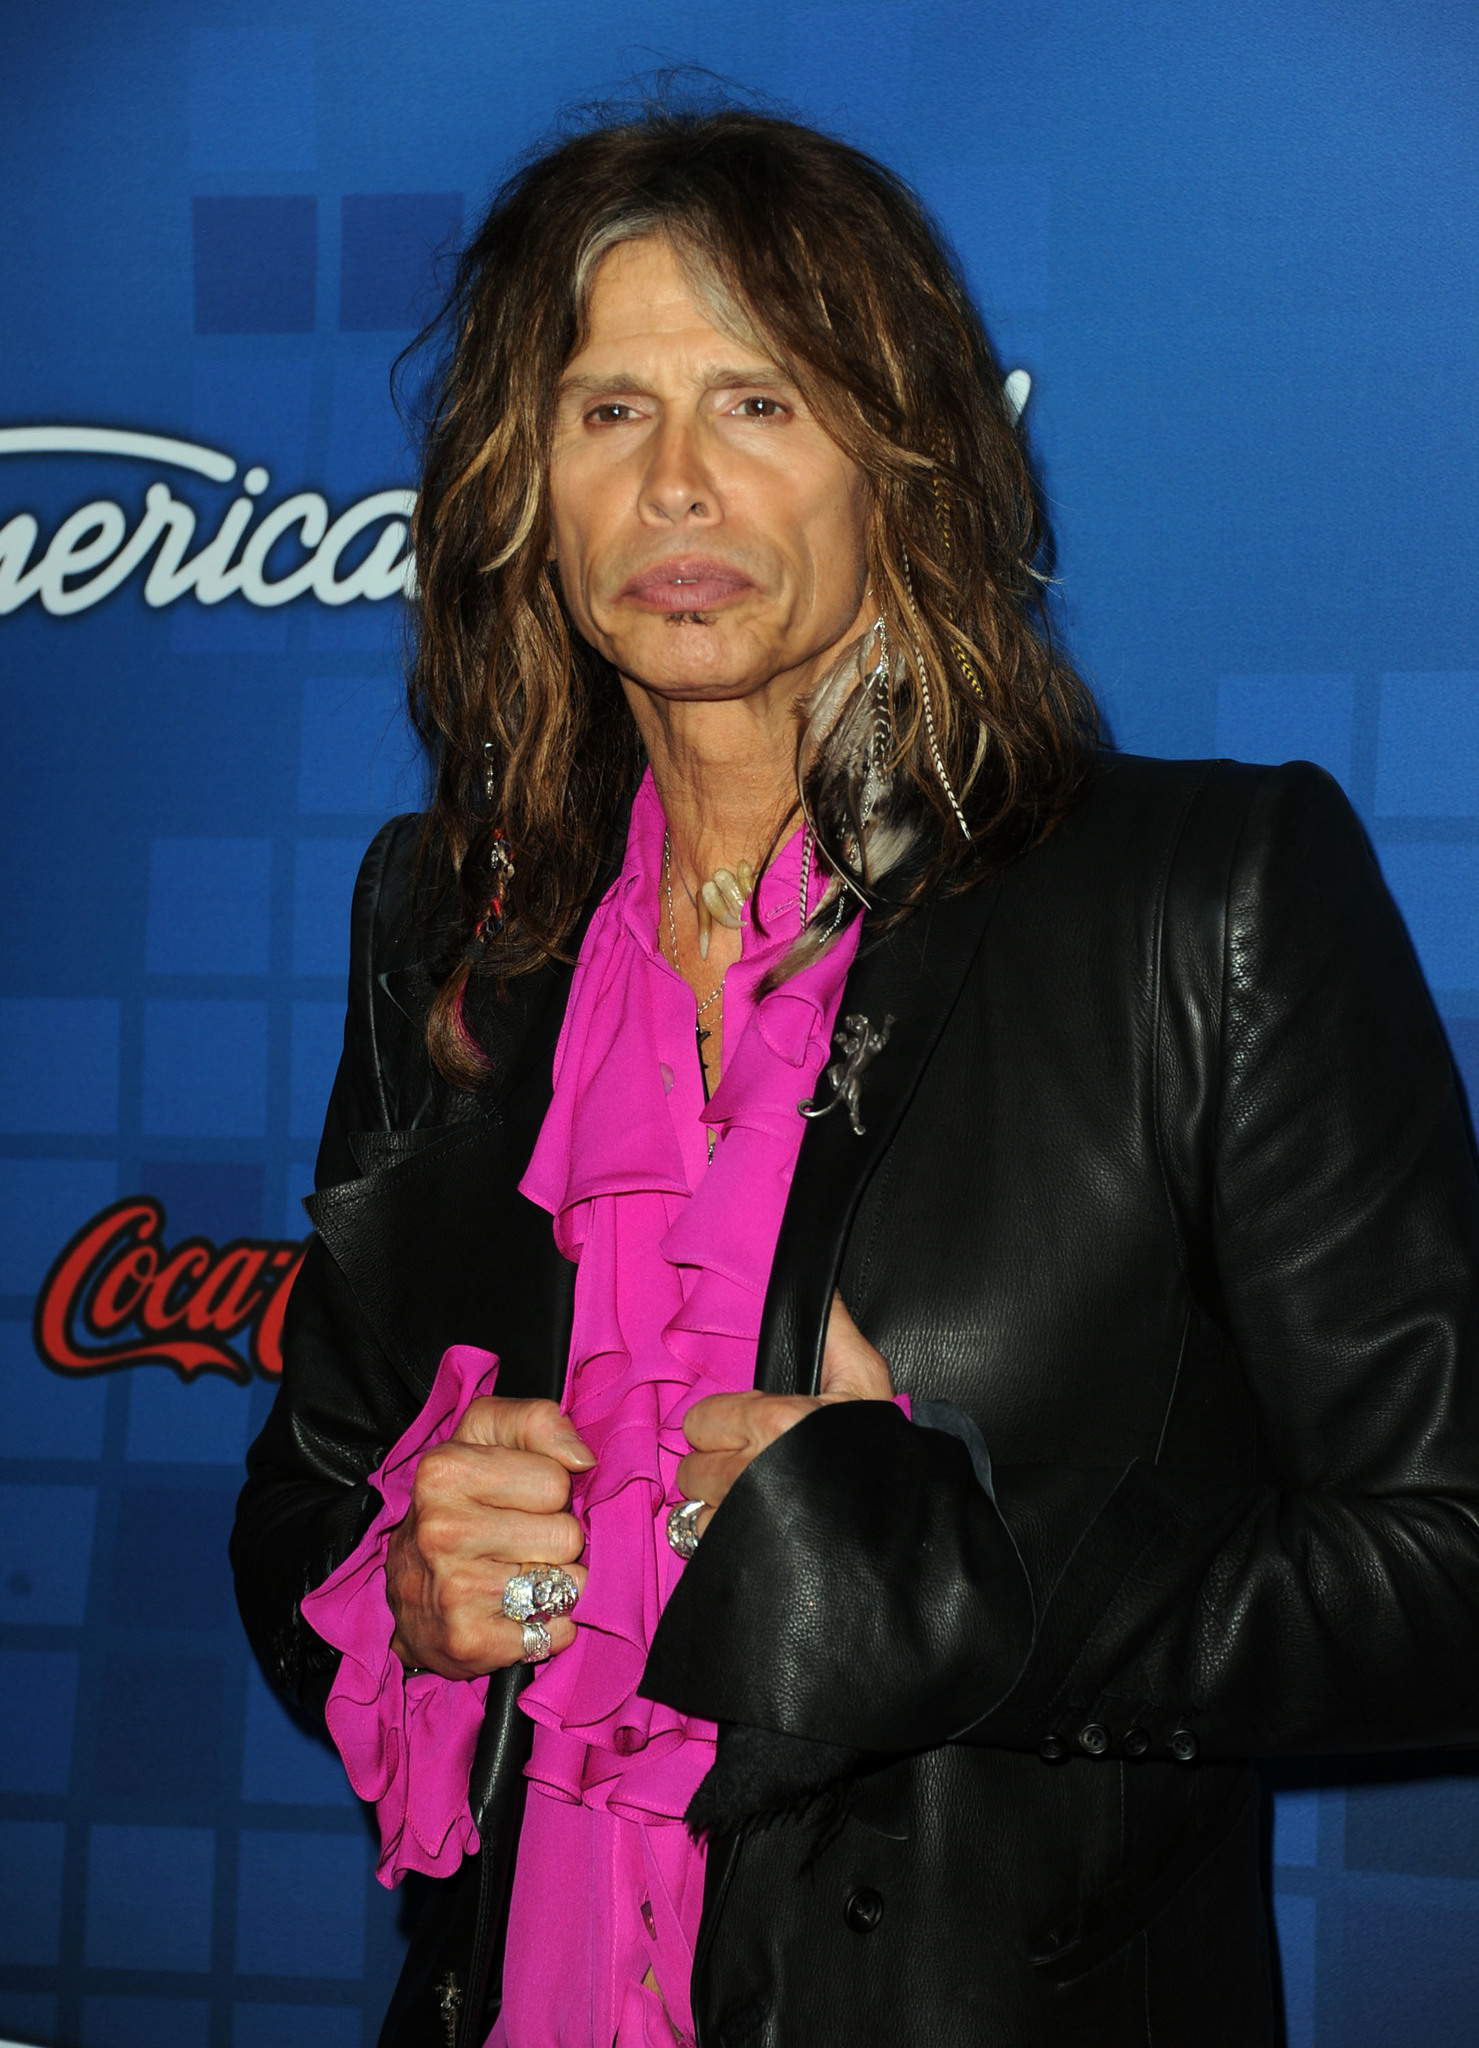 Steven Tyler at event of American Idol: The Search for a Superstar (2002)